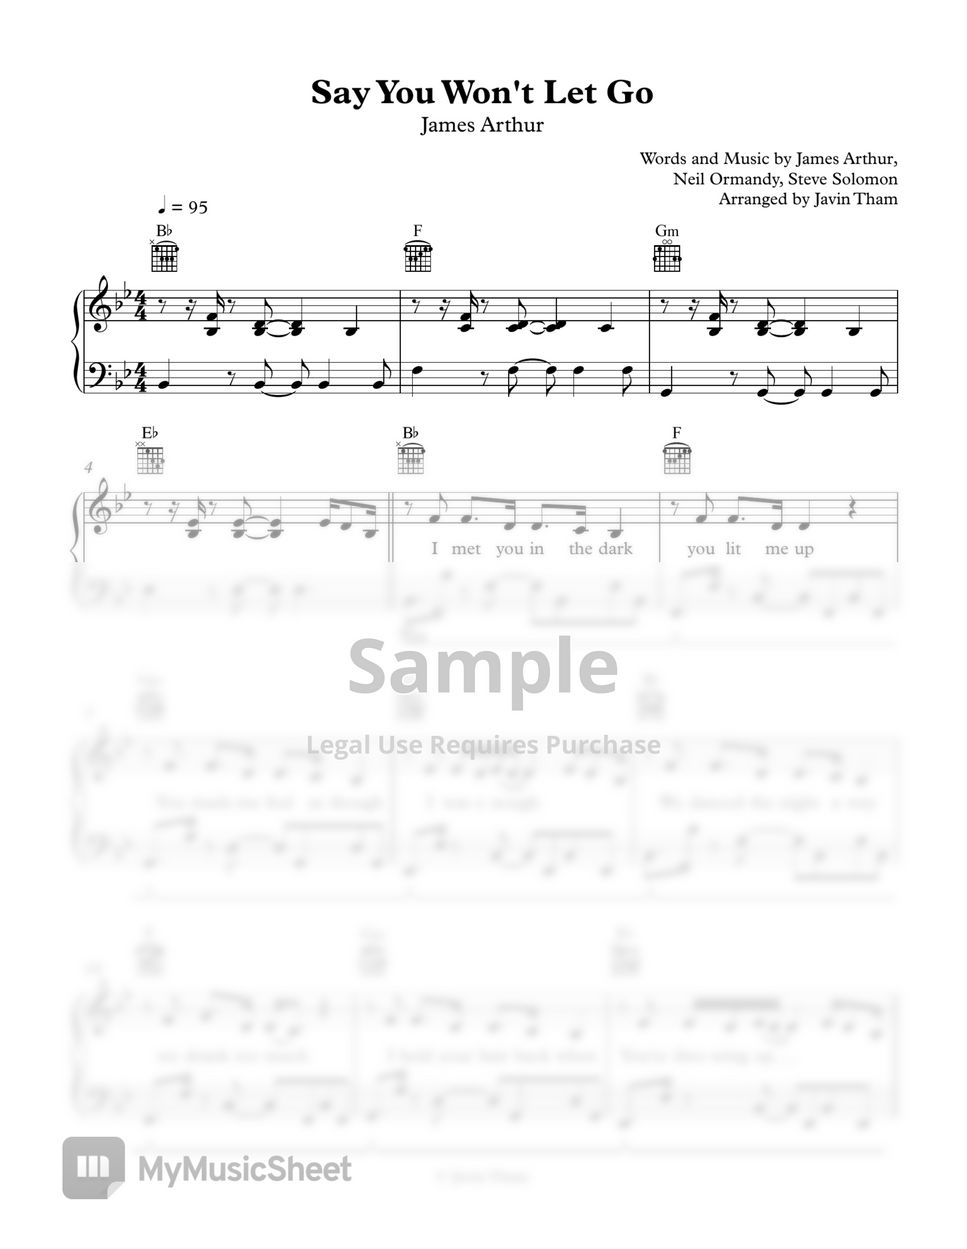 Say You Won't Let Go - James Arthur Sheet music for Piano (Solo)